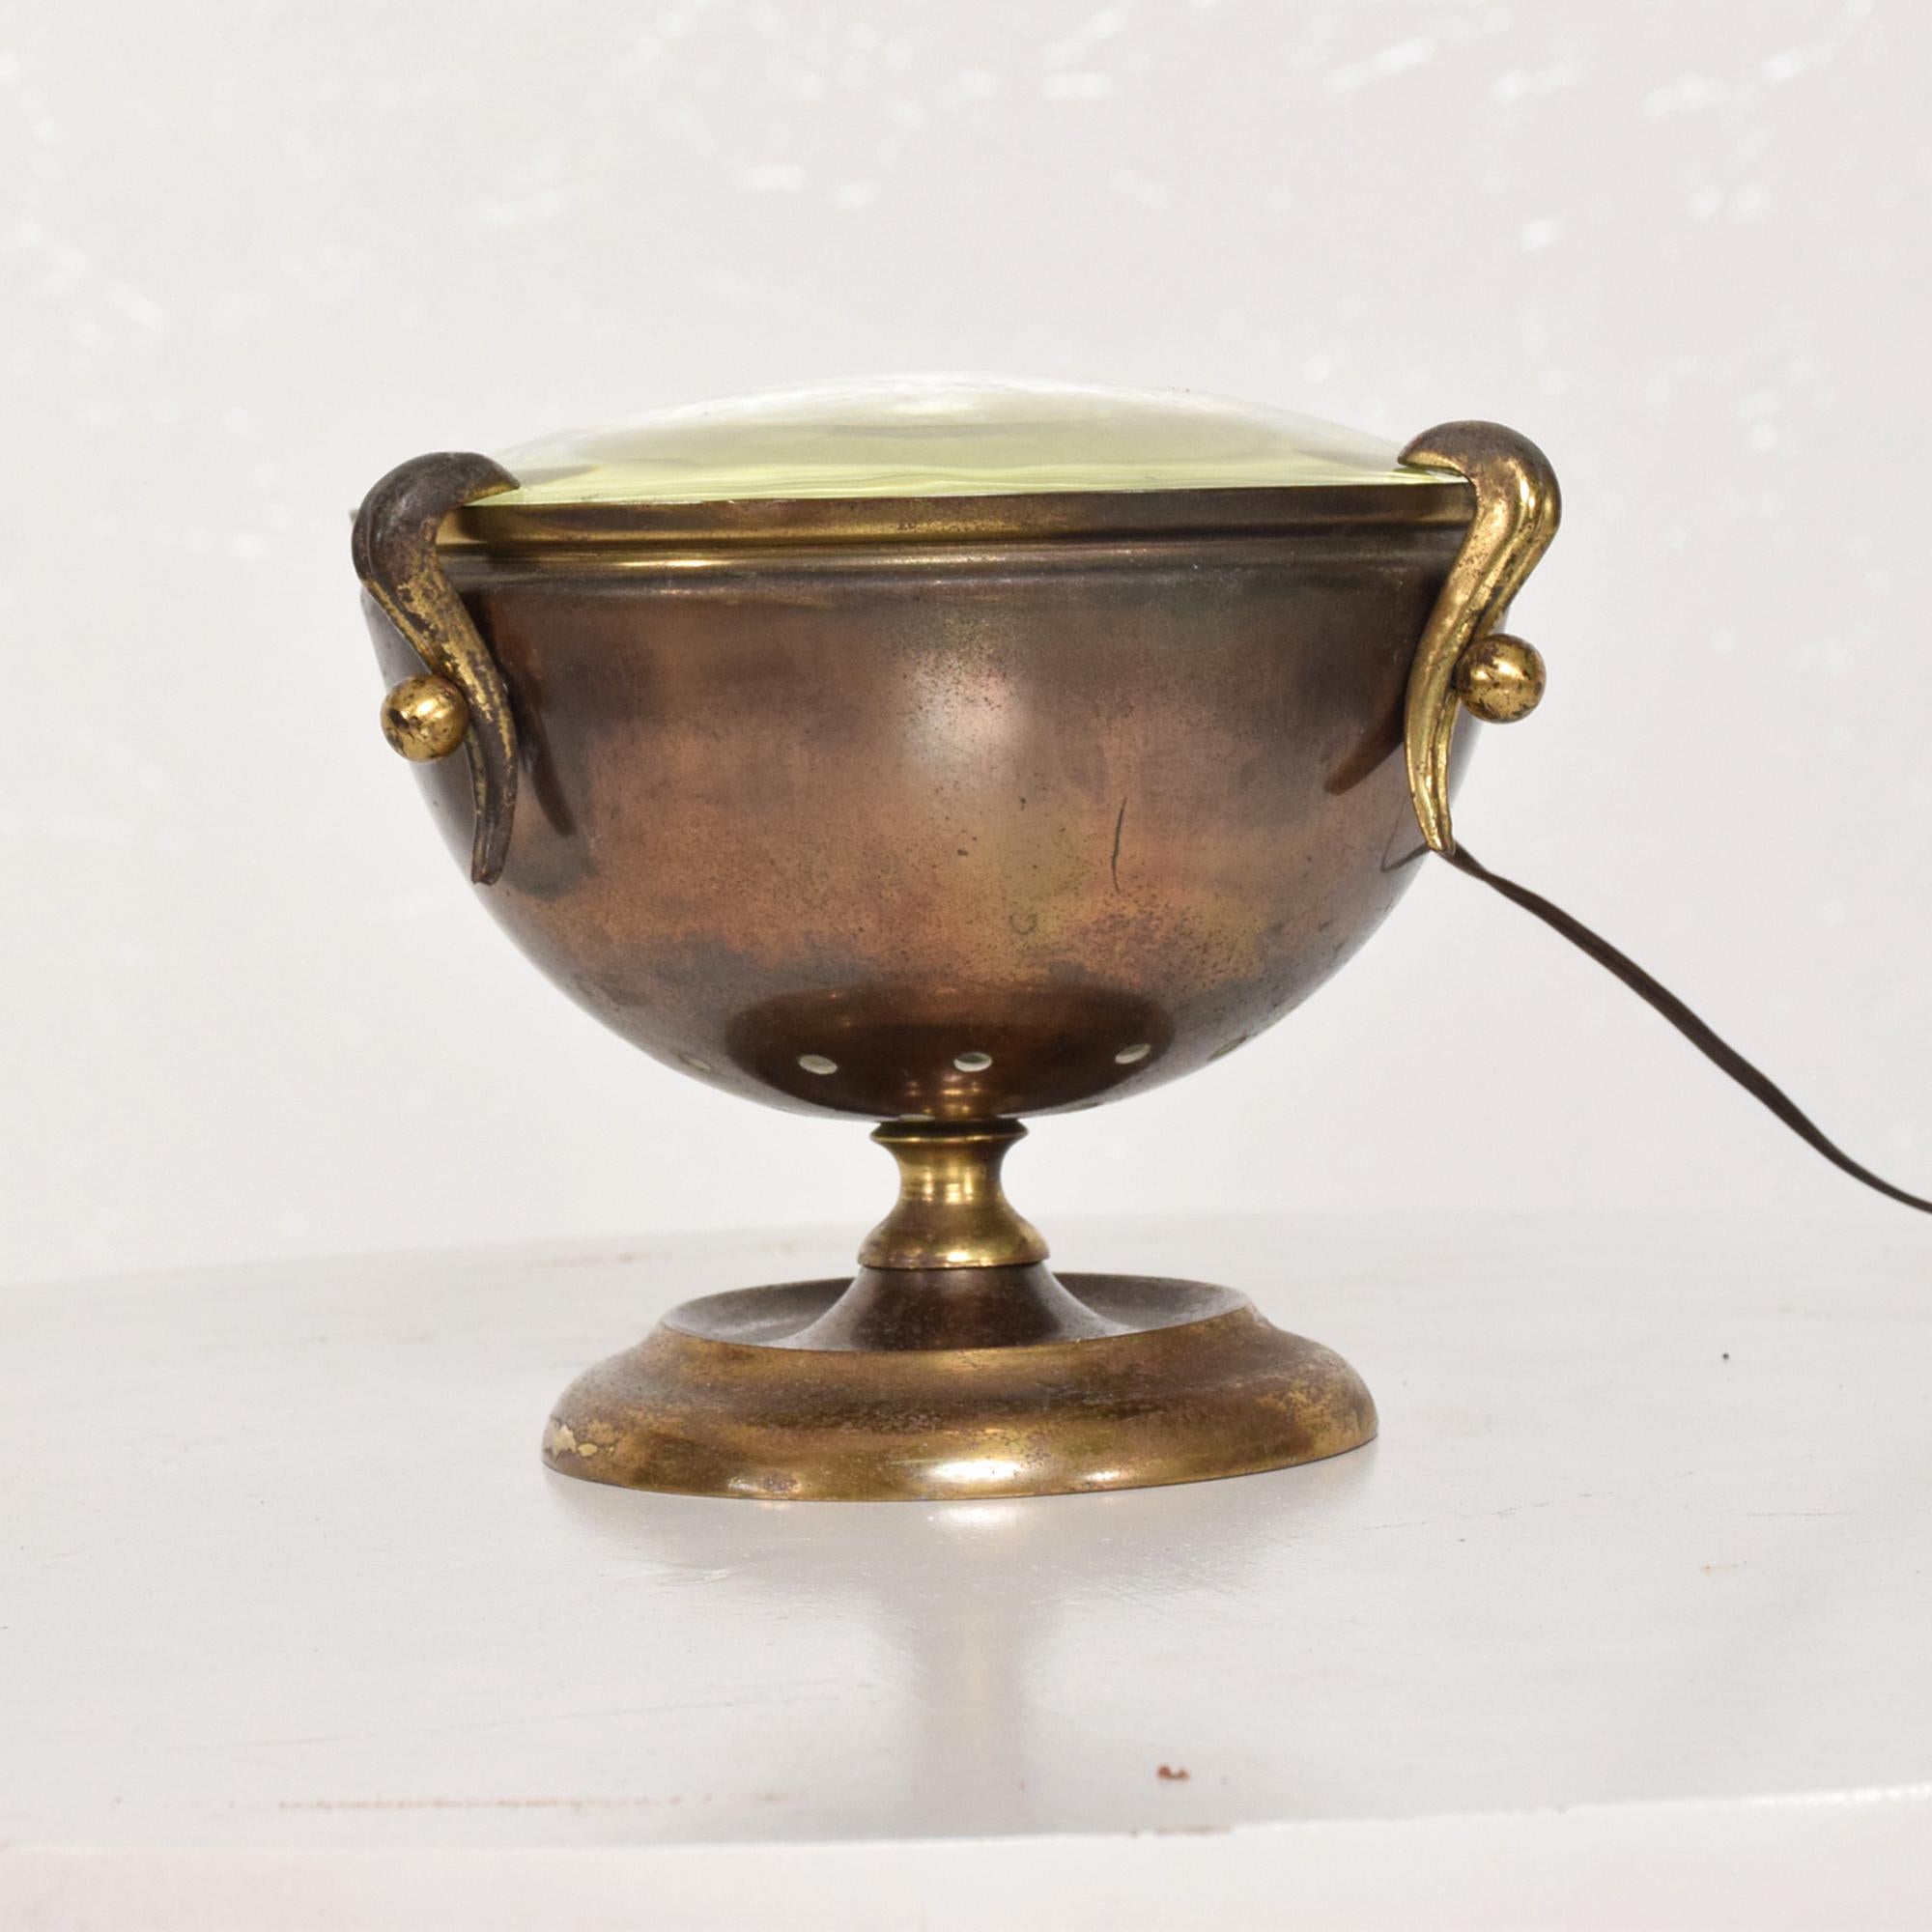 For your consideration an Italian table lamp made in brass in the shape of an urn.
The lamp has a magnifying glass top.
Rewired. No information on the maker. No label present. Original vintage patina.
Made in Italy, circa 1950s.

Dimensions: 4